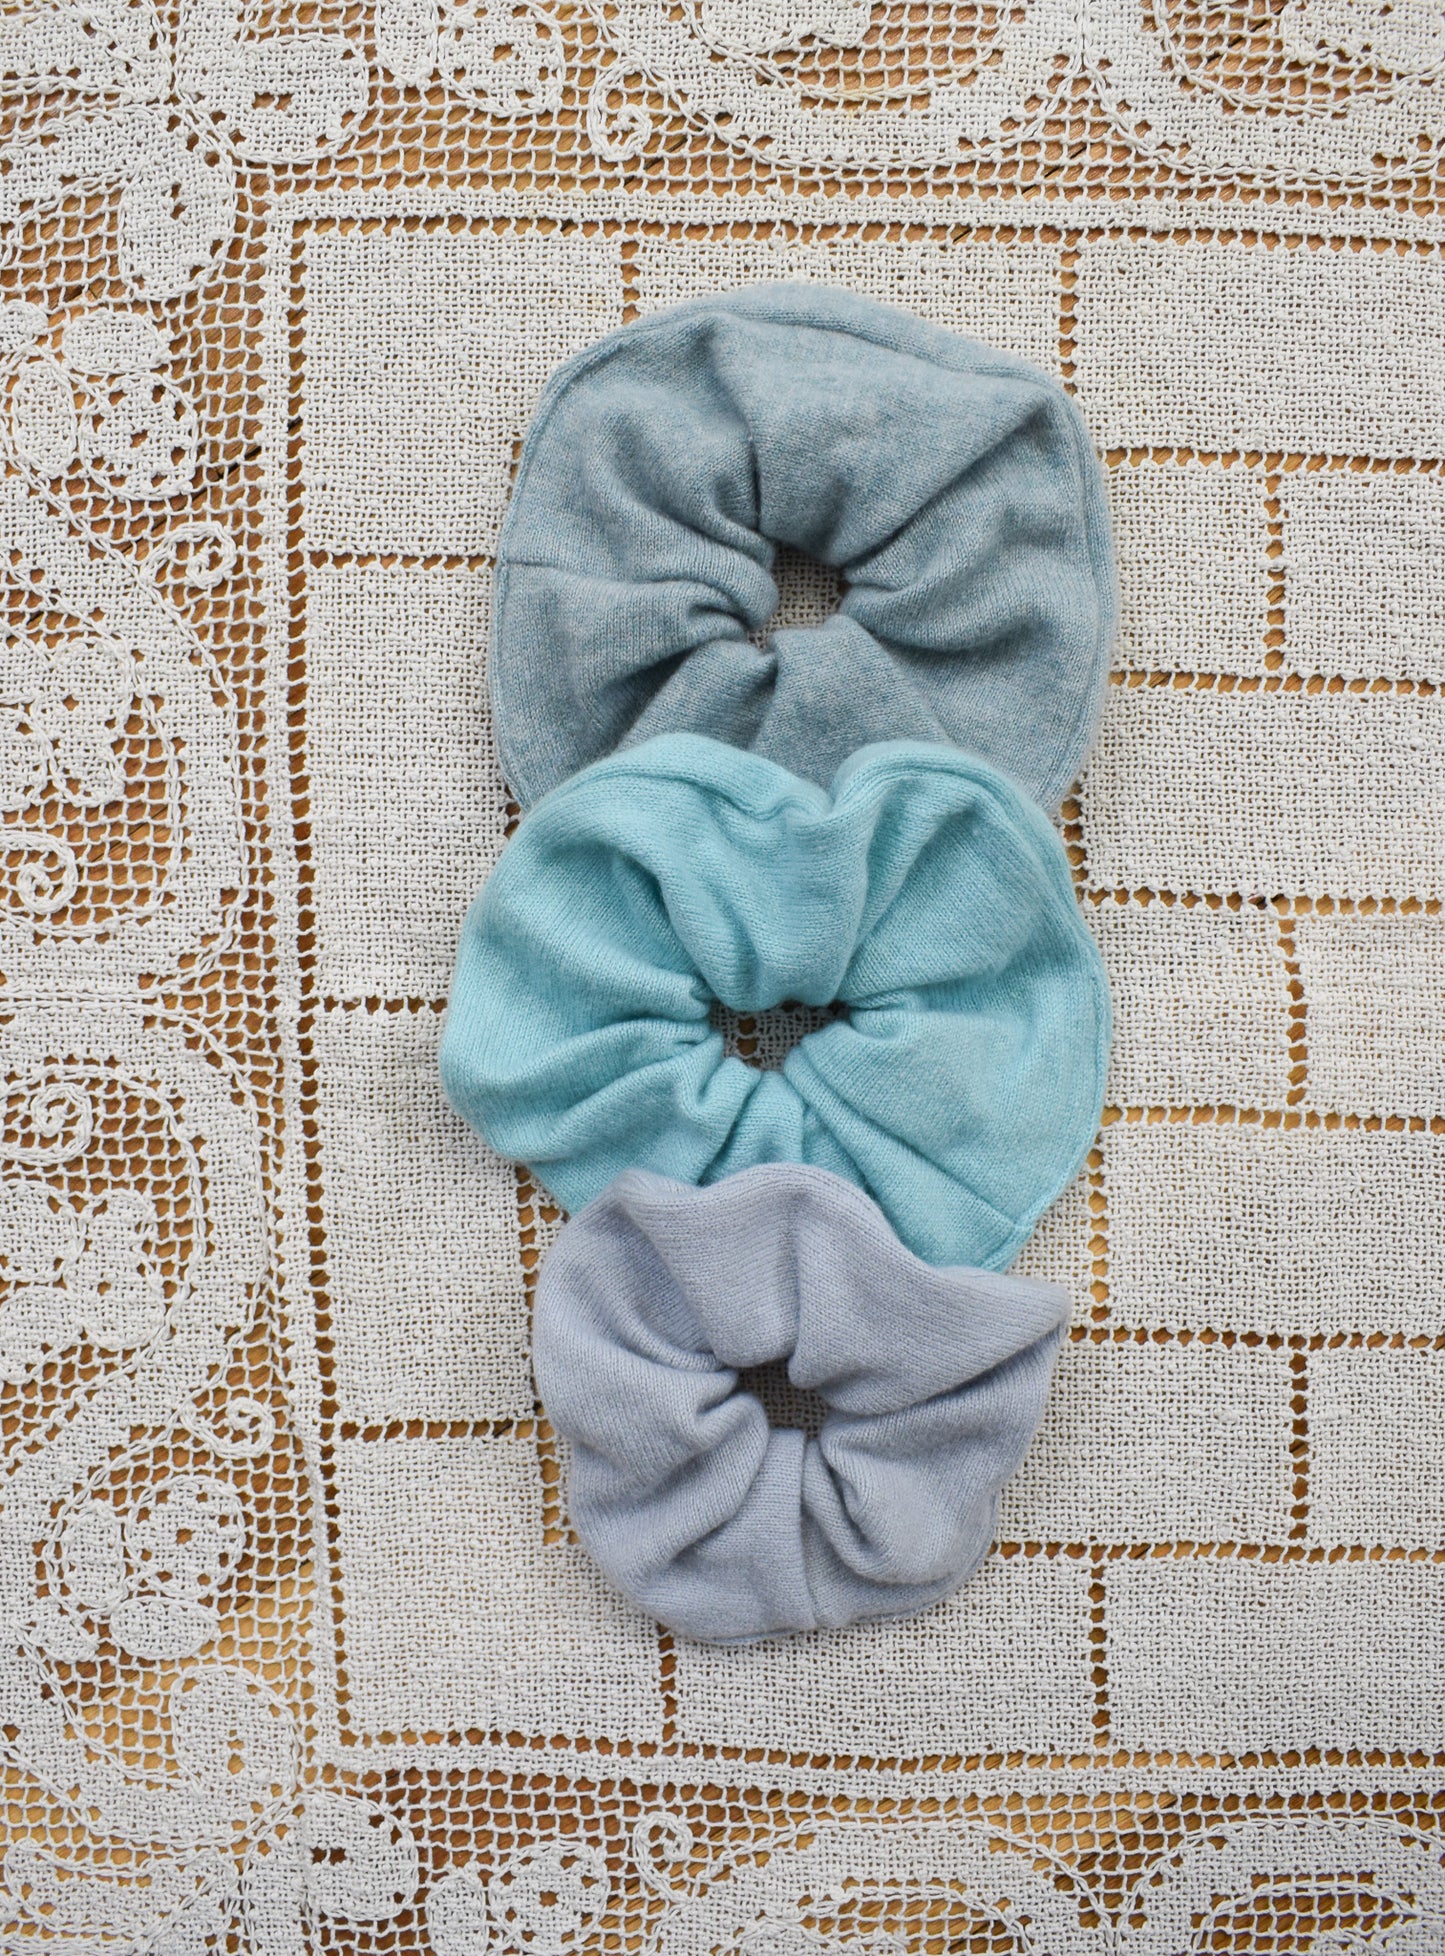 Upcycled Cashmere Scrunchie | Bright Teal